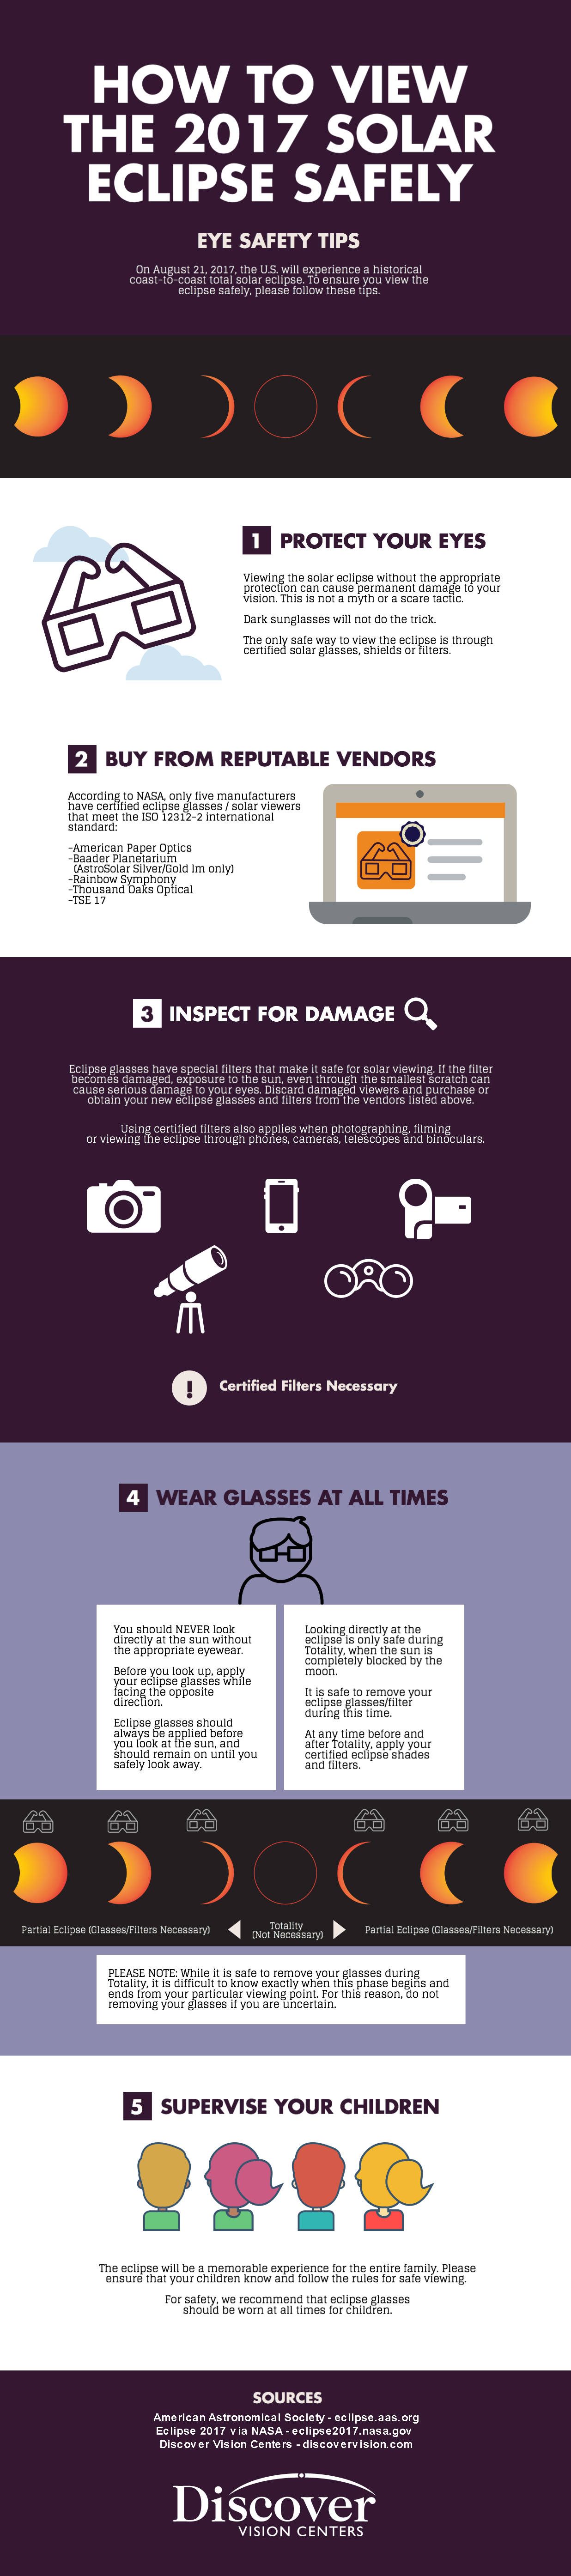 Infographic: Viewing the Eclipse Safely